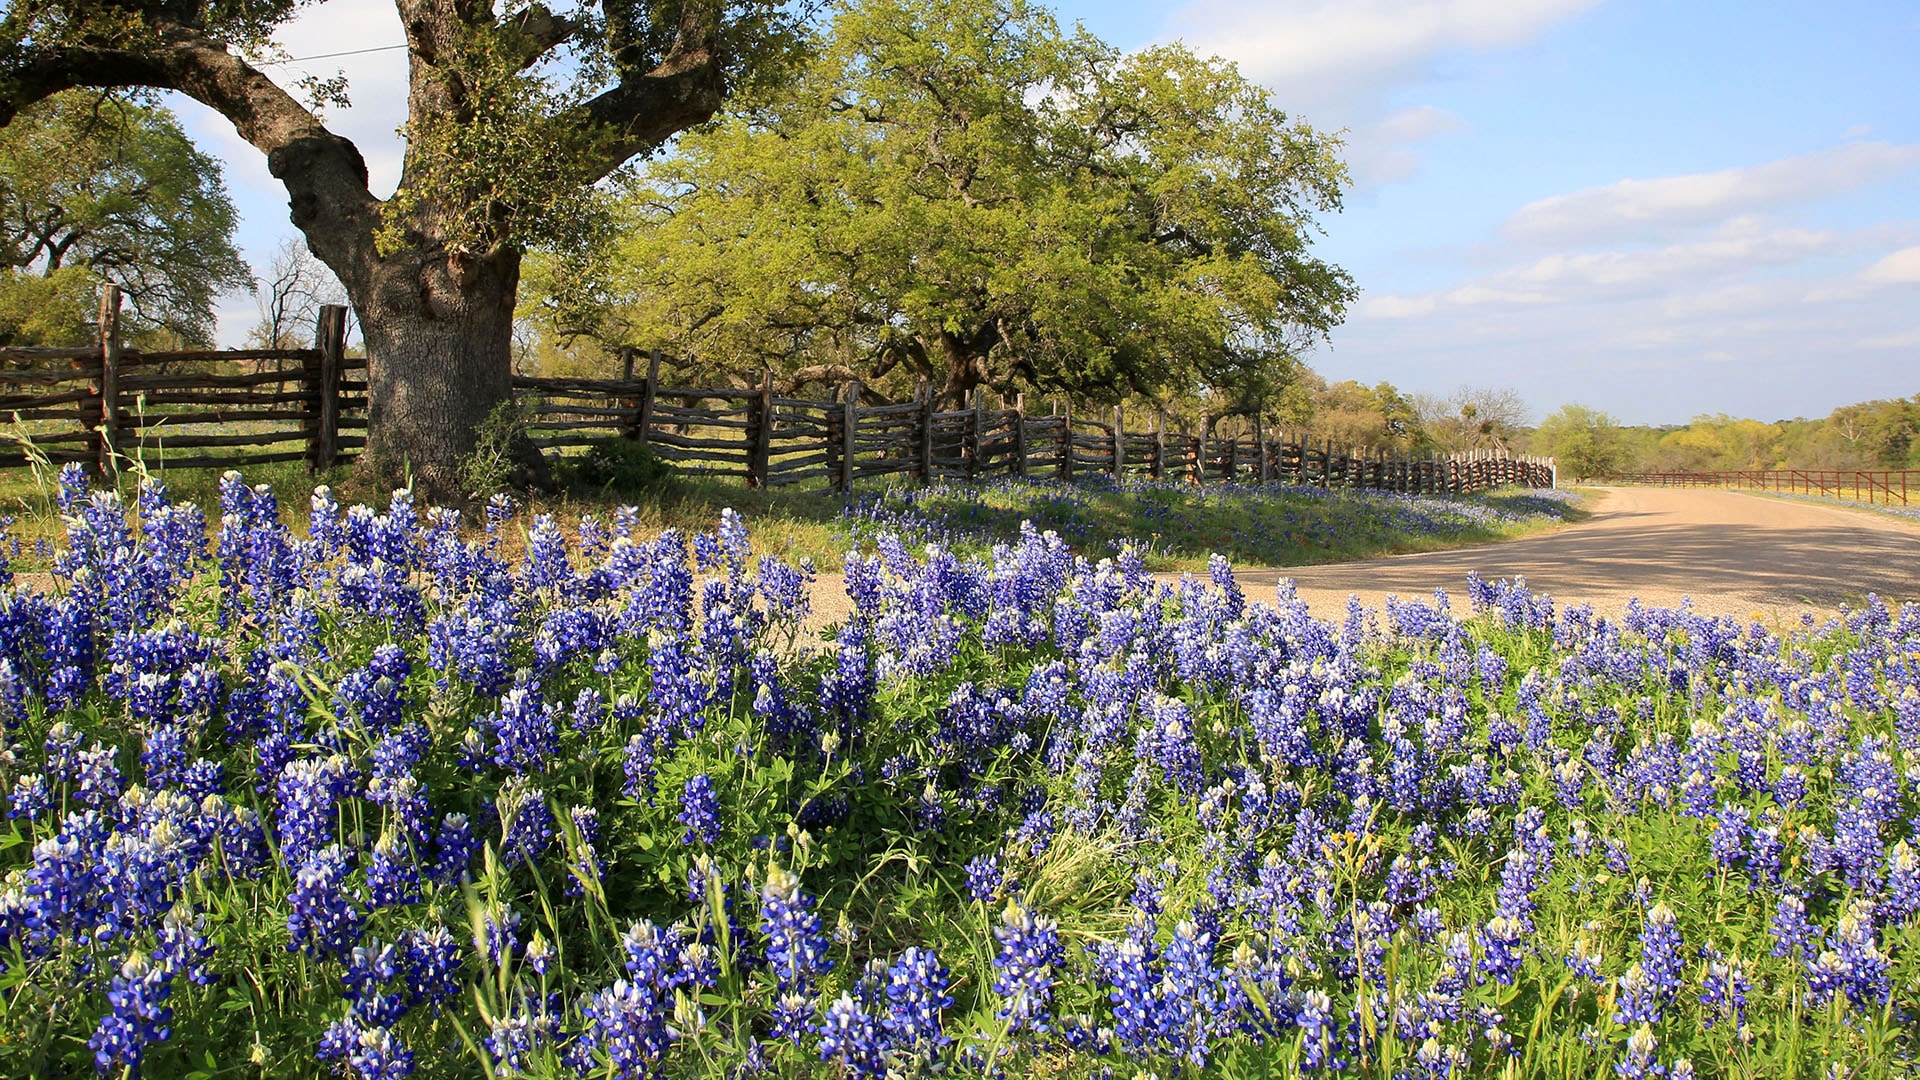 Road Trip to See Texas Bluebonnets